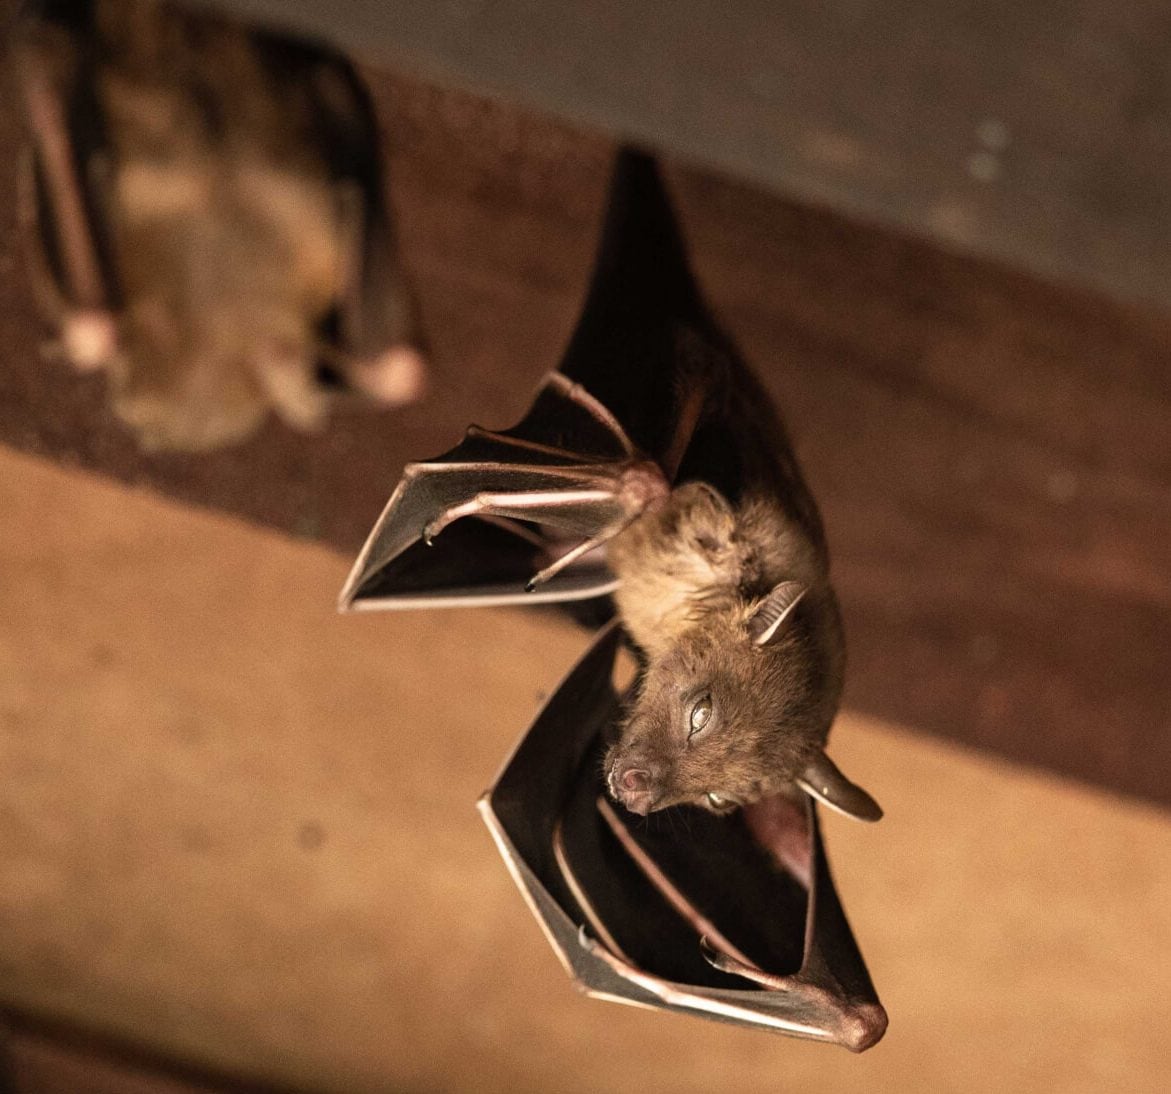 Expert bat removal services for a safe and humane solution in Sioux City